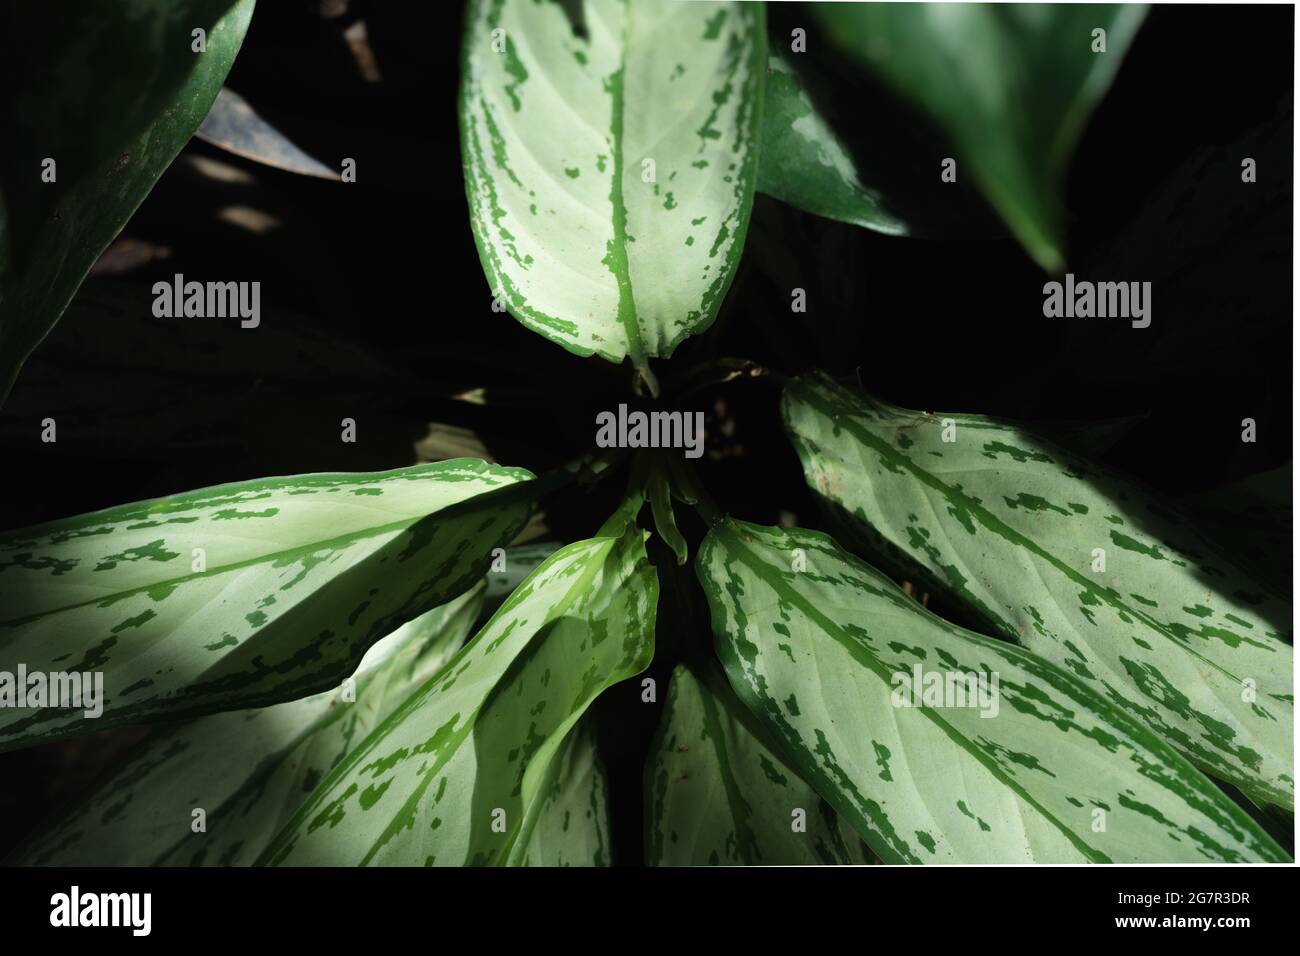 Close up of nature green aglaonema chinese evergreen leaves exposed with sunlight with dark background for wallpaper Stock Photo